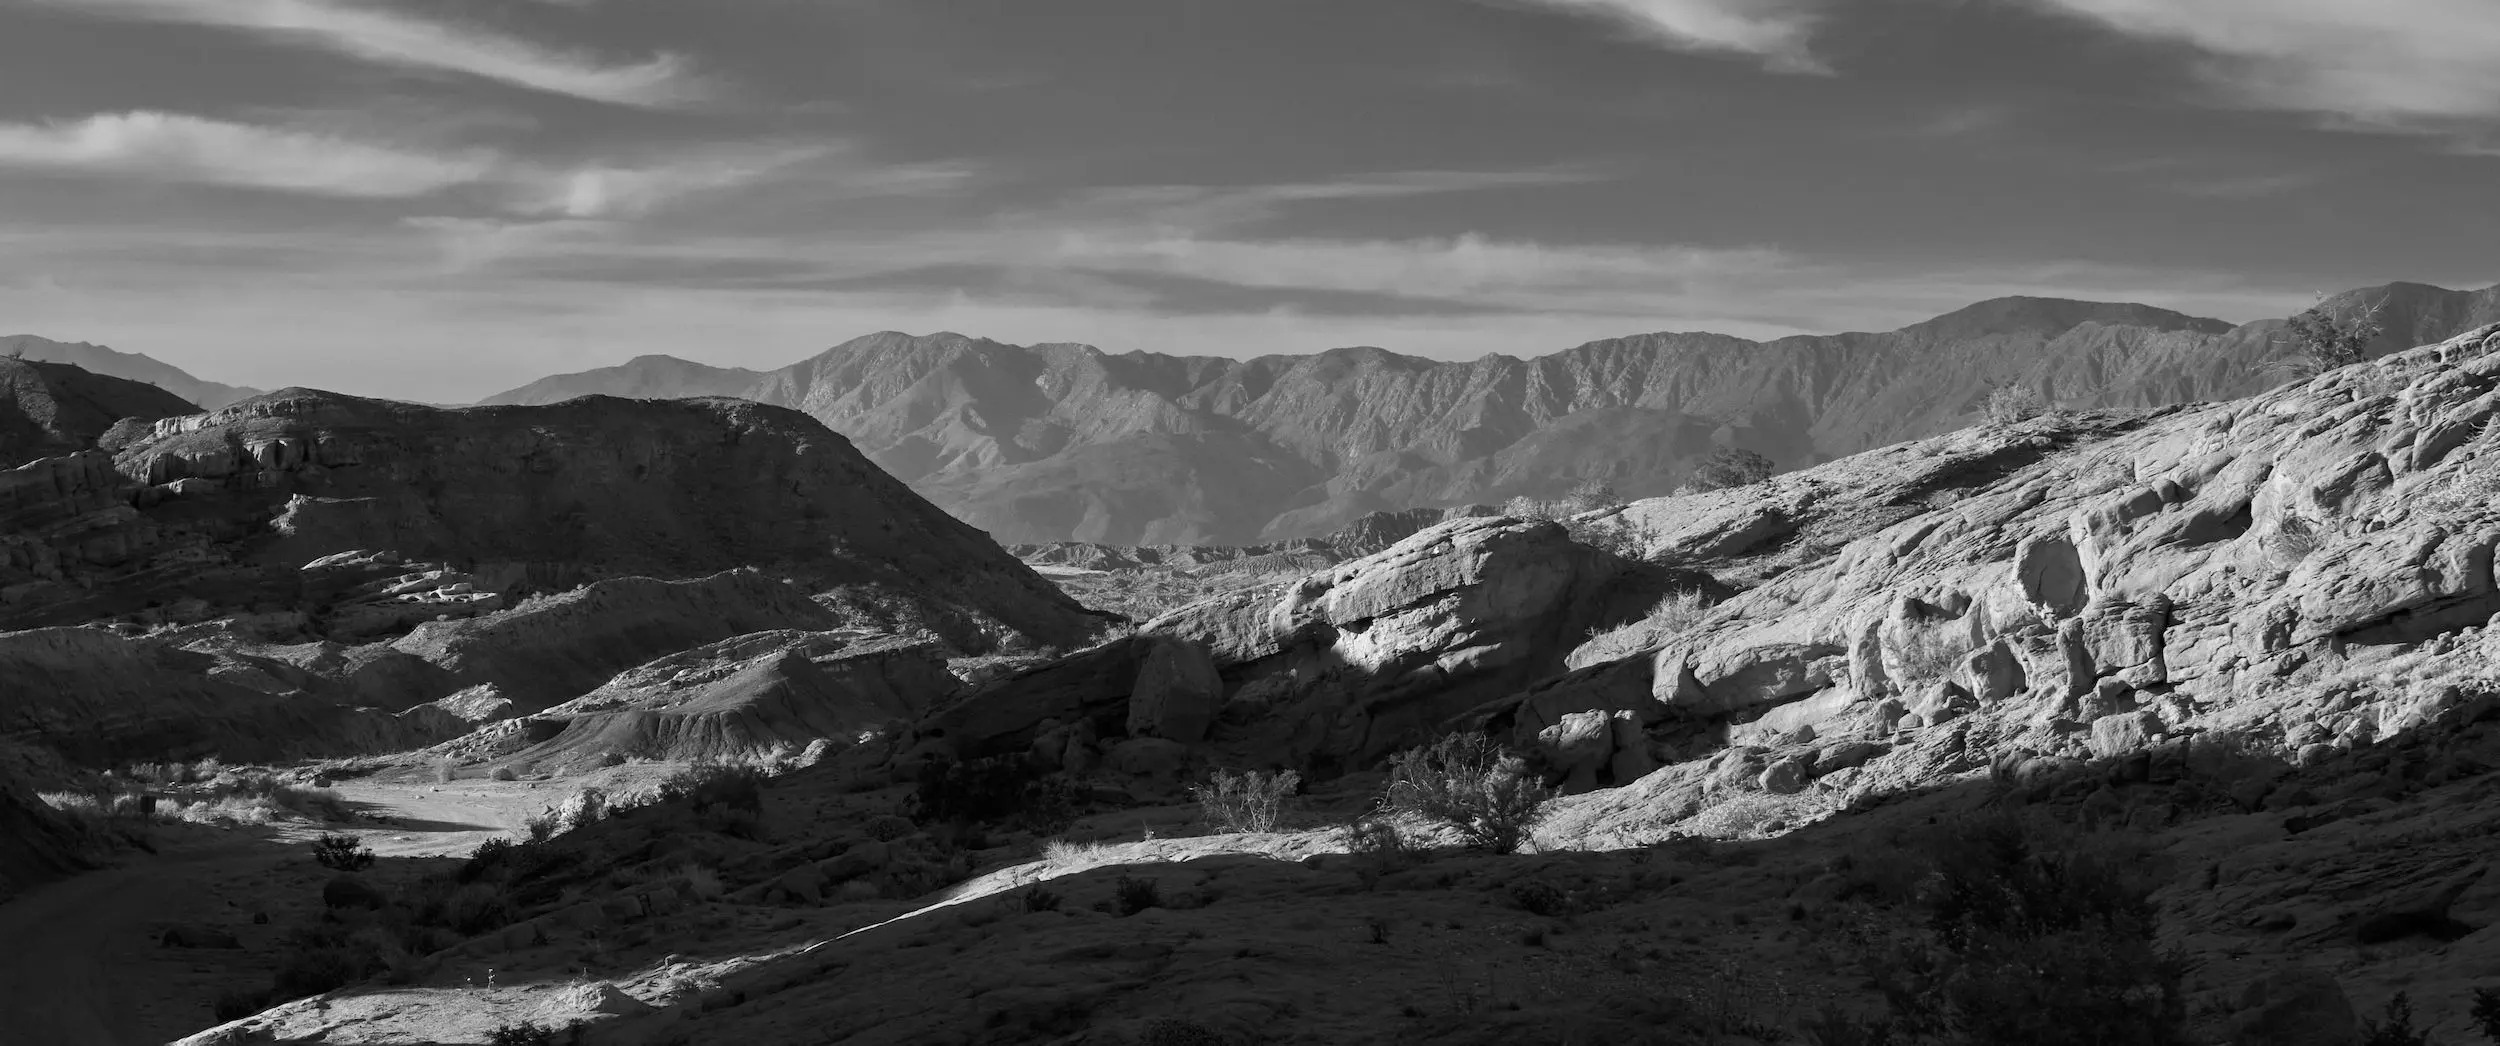 Black and white wide shot with sunset light and shadow raking through a rocky landscape with mountains in the background.